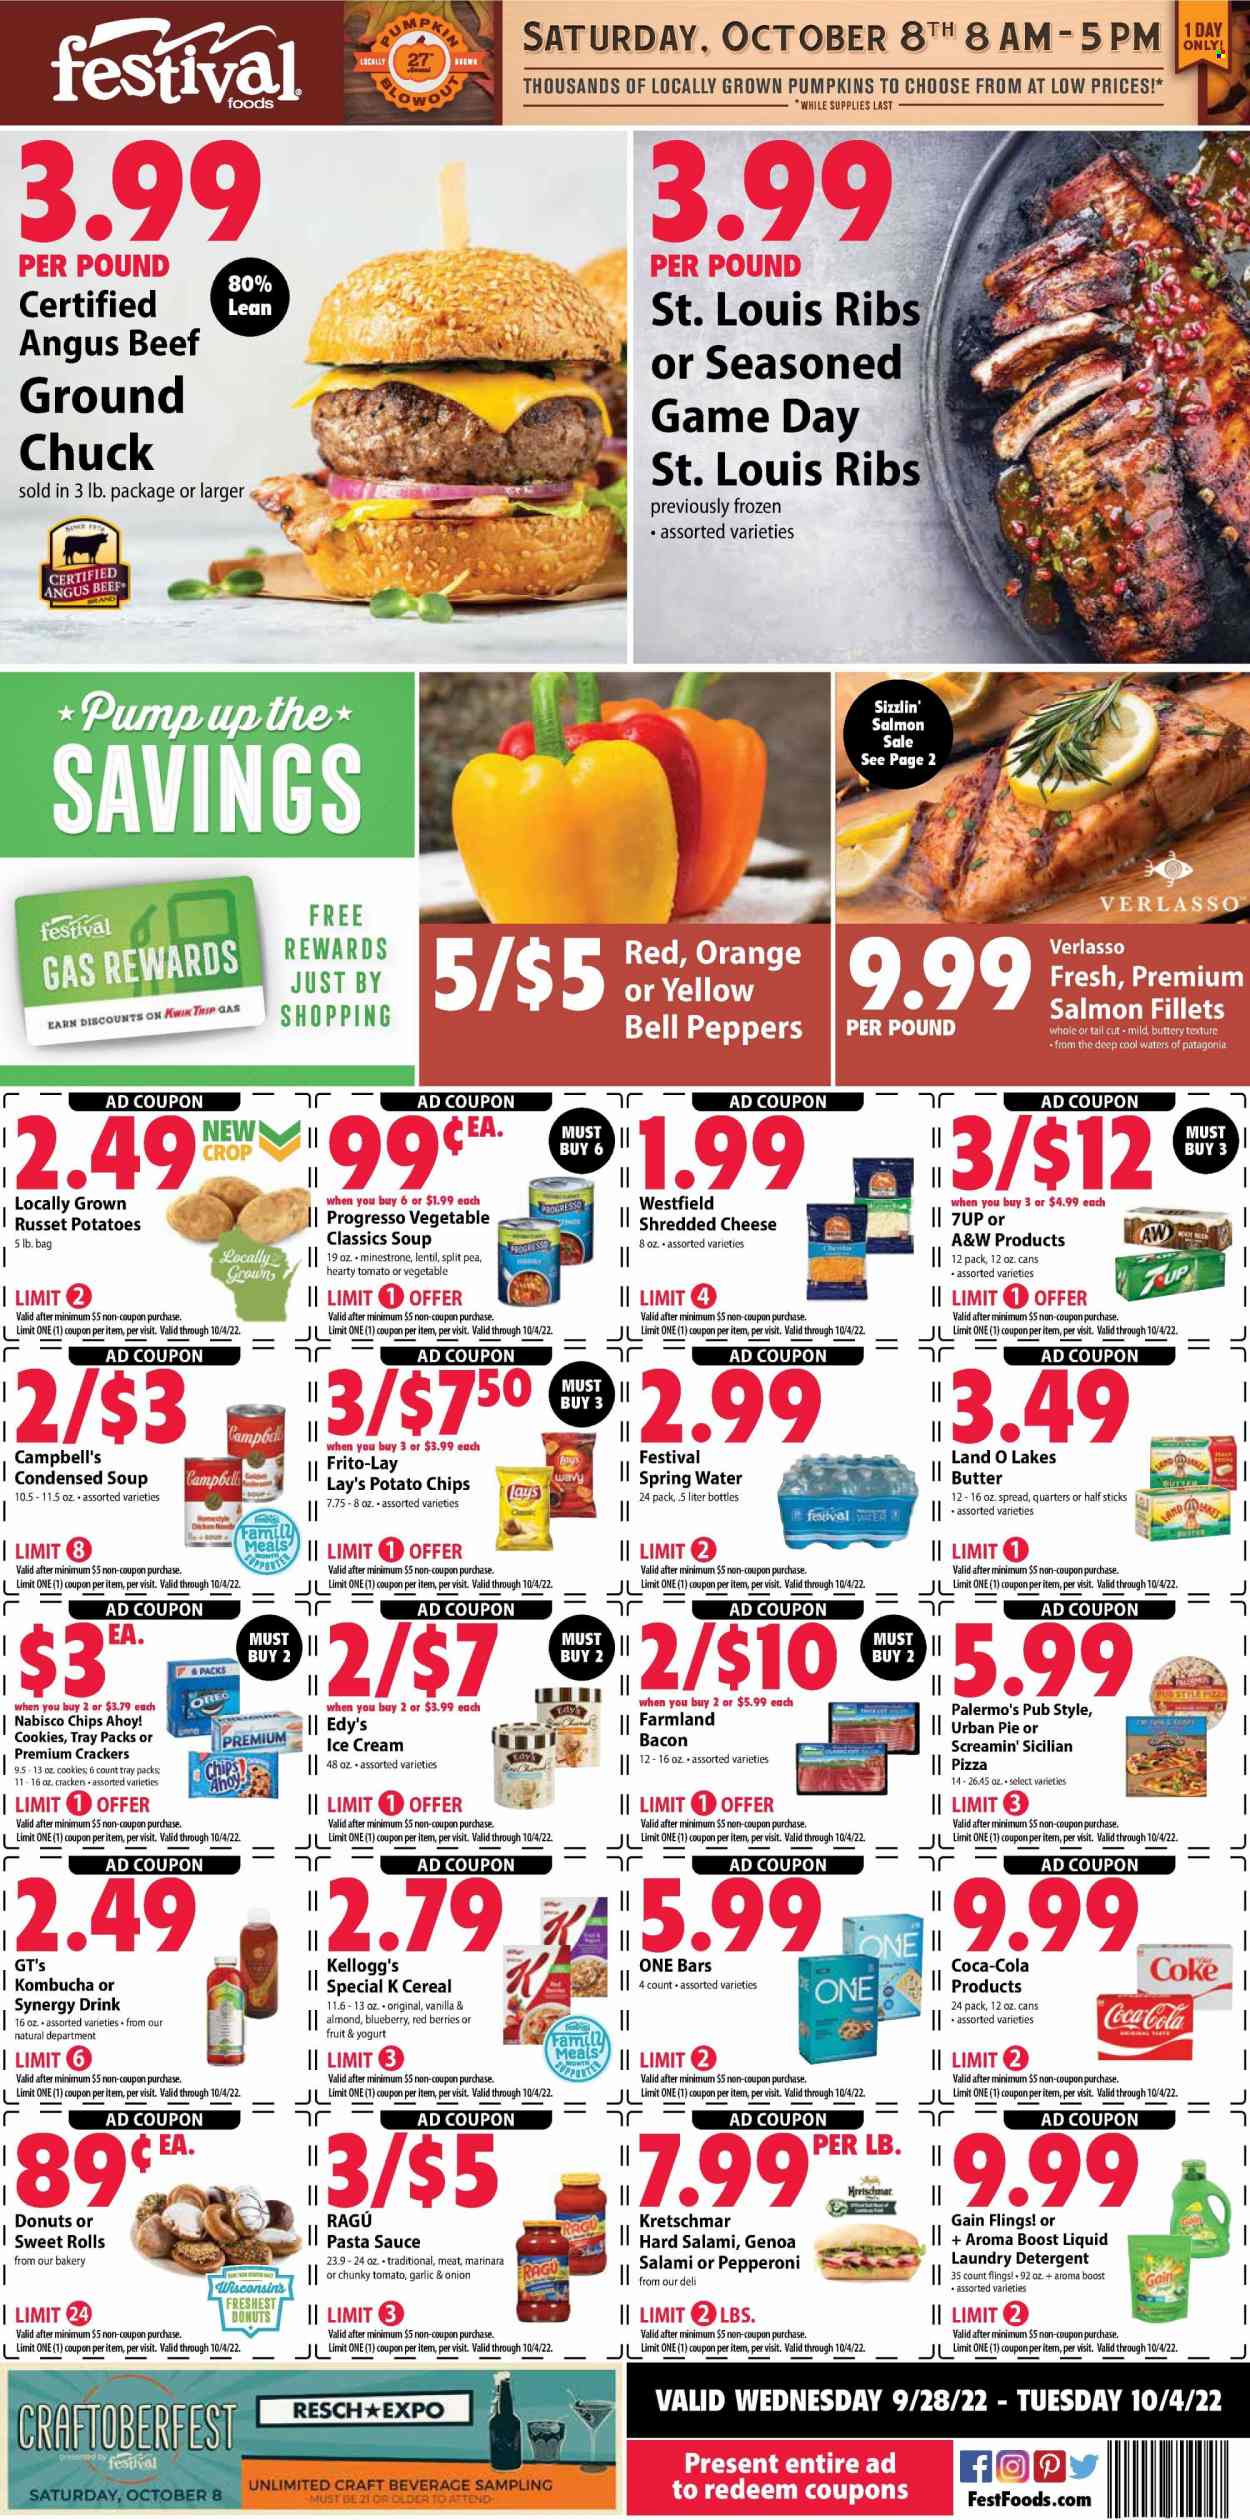 thumbnail - Festival Foods Flyer - 09/28/2022 - 10/04/2022 - Sales products - donut, sweet rolls, bell peppers, russet potatoes, pumpkin, peppers, oranges, salmon, salmon fillet, Campbell's, pizza, pasta sauce, condensed soup, soup, sauce, Urban Pie, instant soup, Progresso, ragú pasta, bacon, salami, pepperoni, shredded cheese, Oreo, yoghurt, butter, ice cream, Screamin' Sicilian, cookies, crackers, Kellogg's, Chips Ahoy!, potato chips, Lay’s, Frito-Lay, cereals, ragu, Coca-Cola, 7UP, A&W, spring water, kombucha, Boost, beef meat, ground chuck, detergent, Gain, laundry detergent. Page 1.